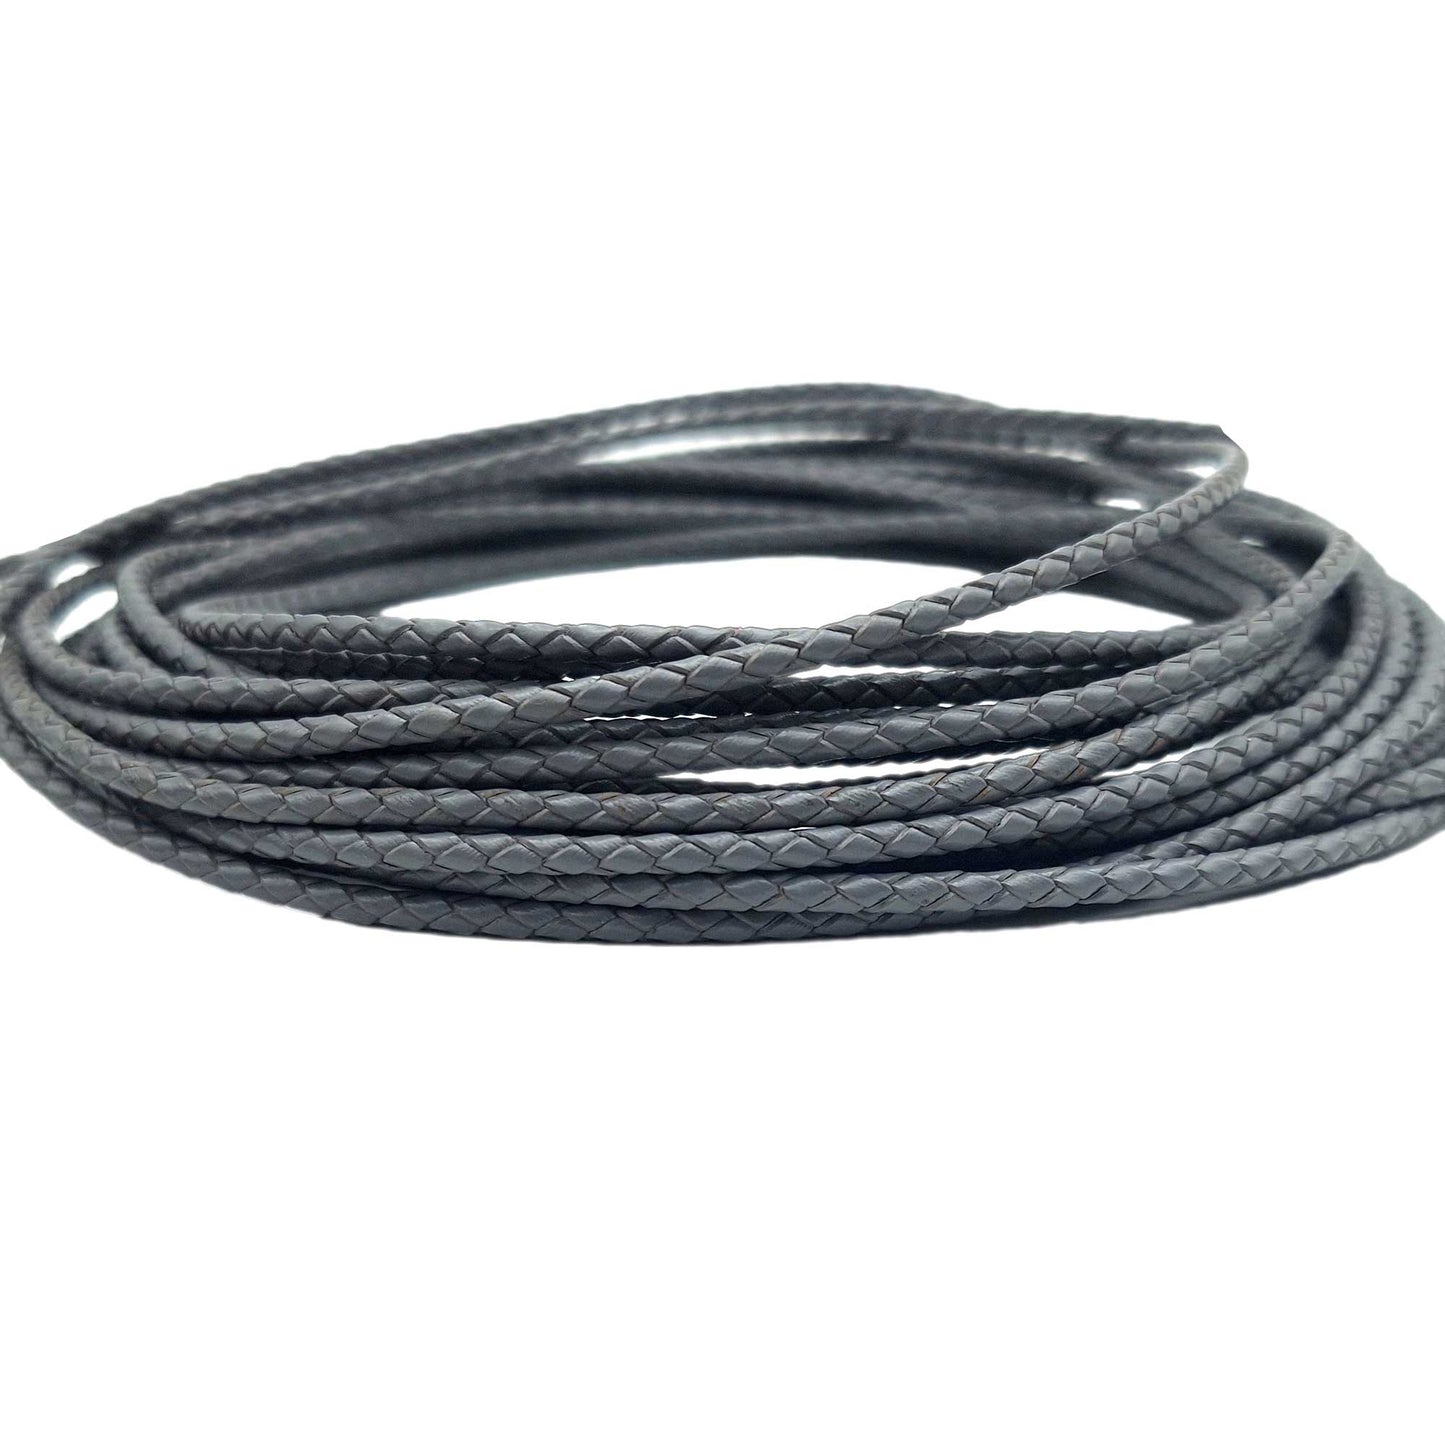 shapesbyX Darker Gray Braided Leather Bolos Cords 3mm Round